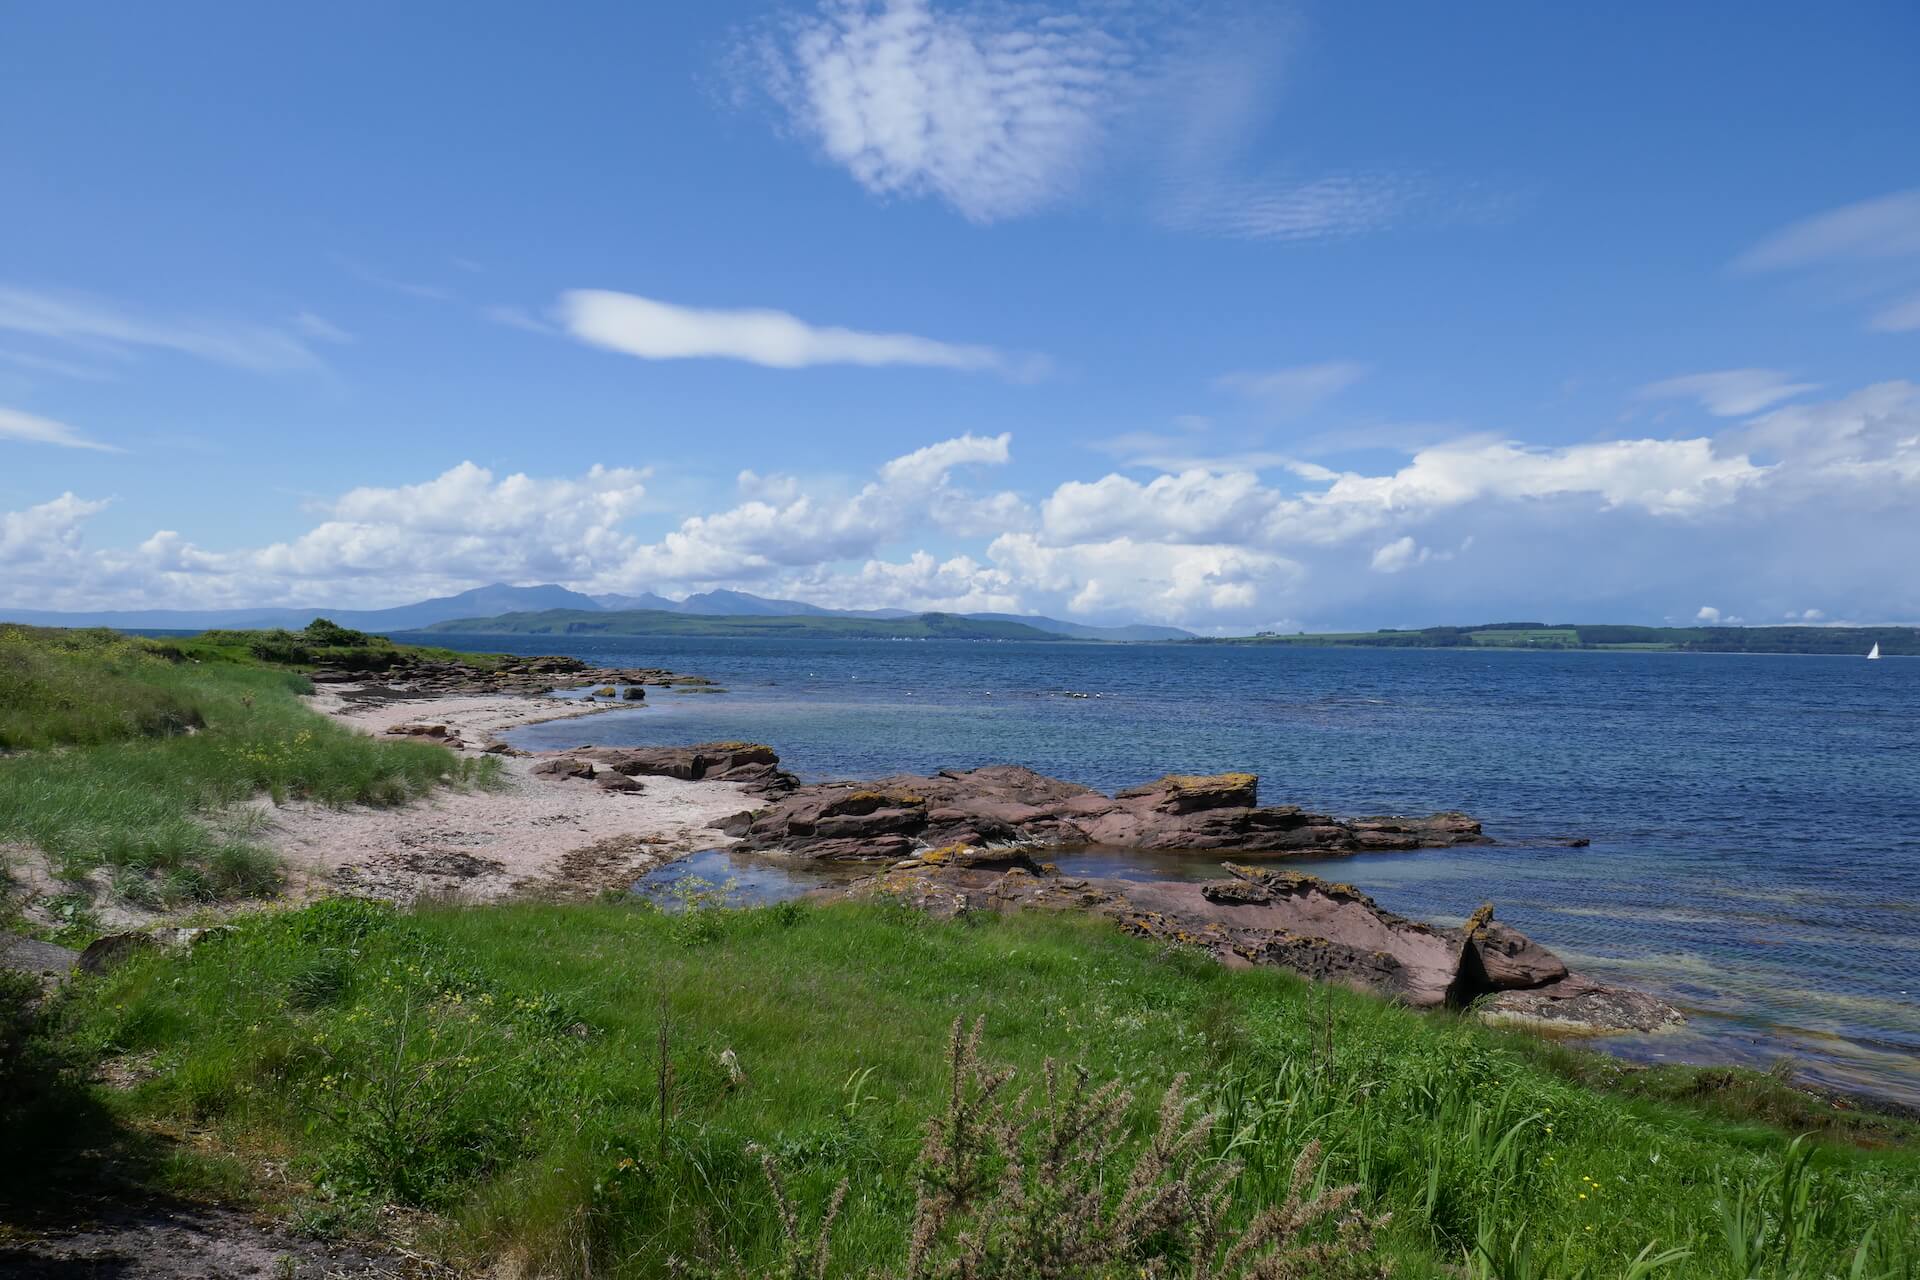 Sandstone on the shore of the Isle of Cumbrae